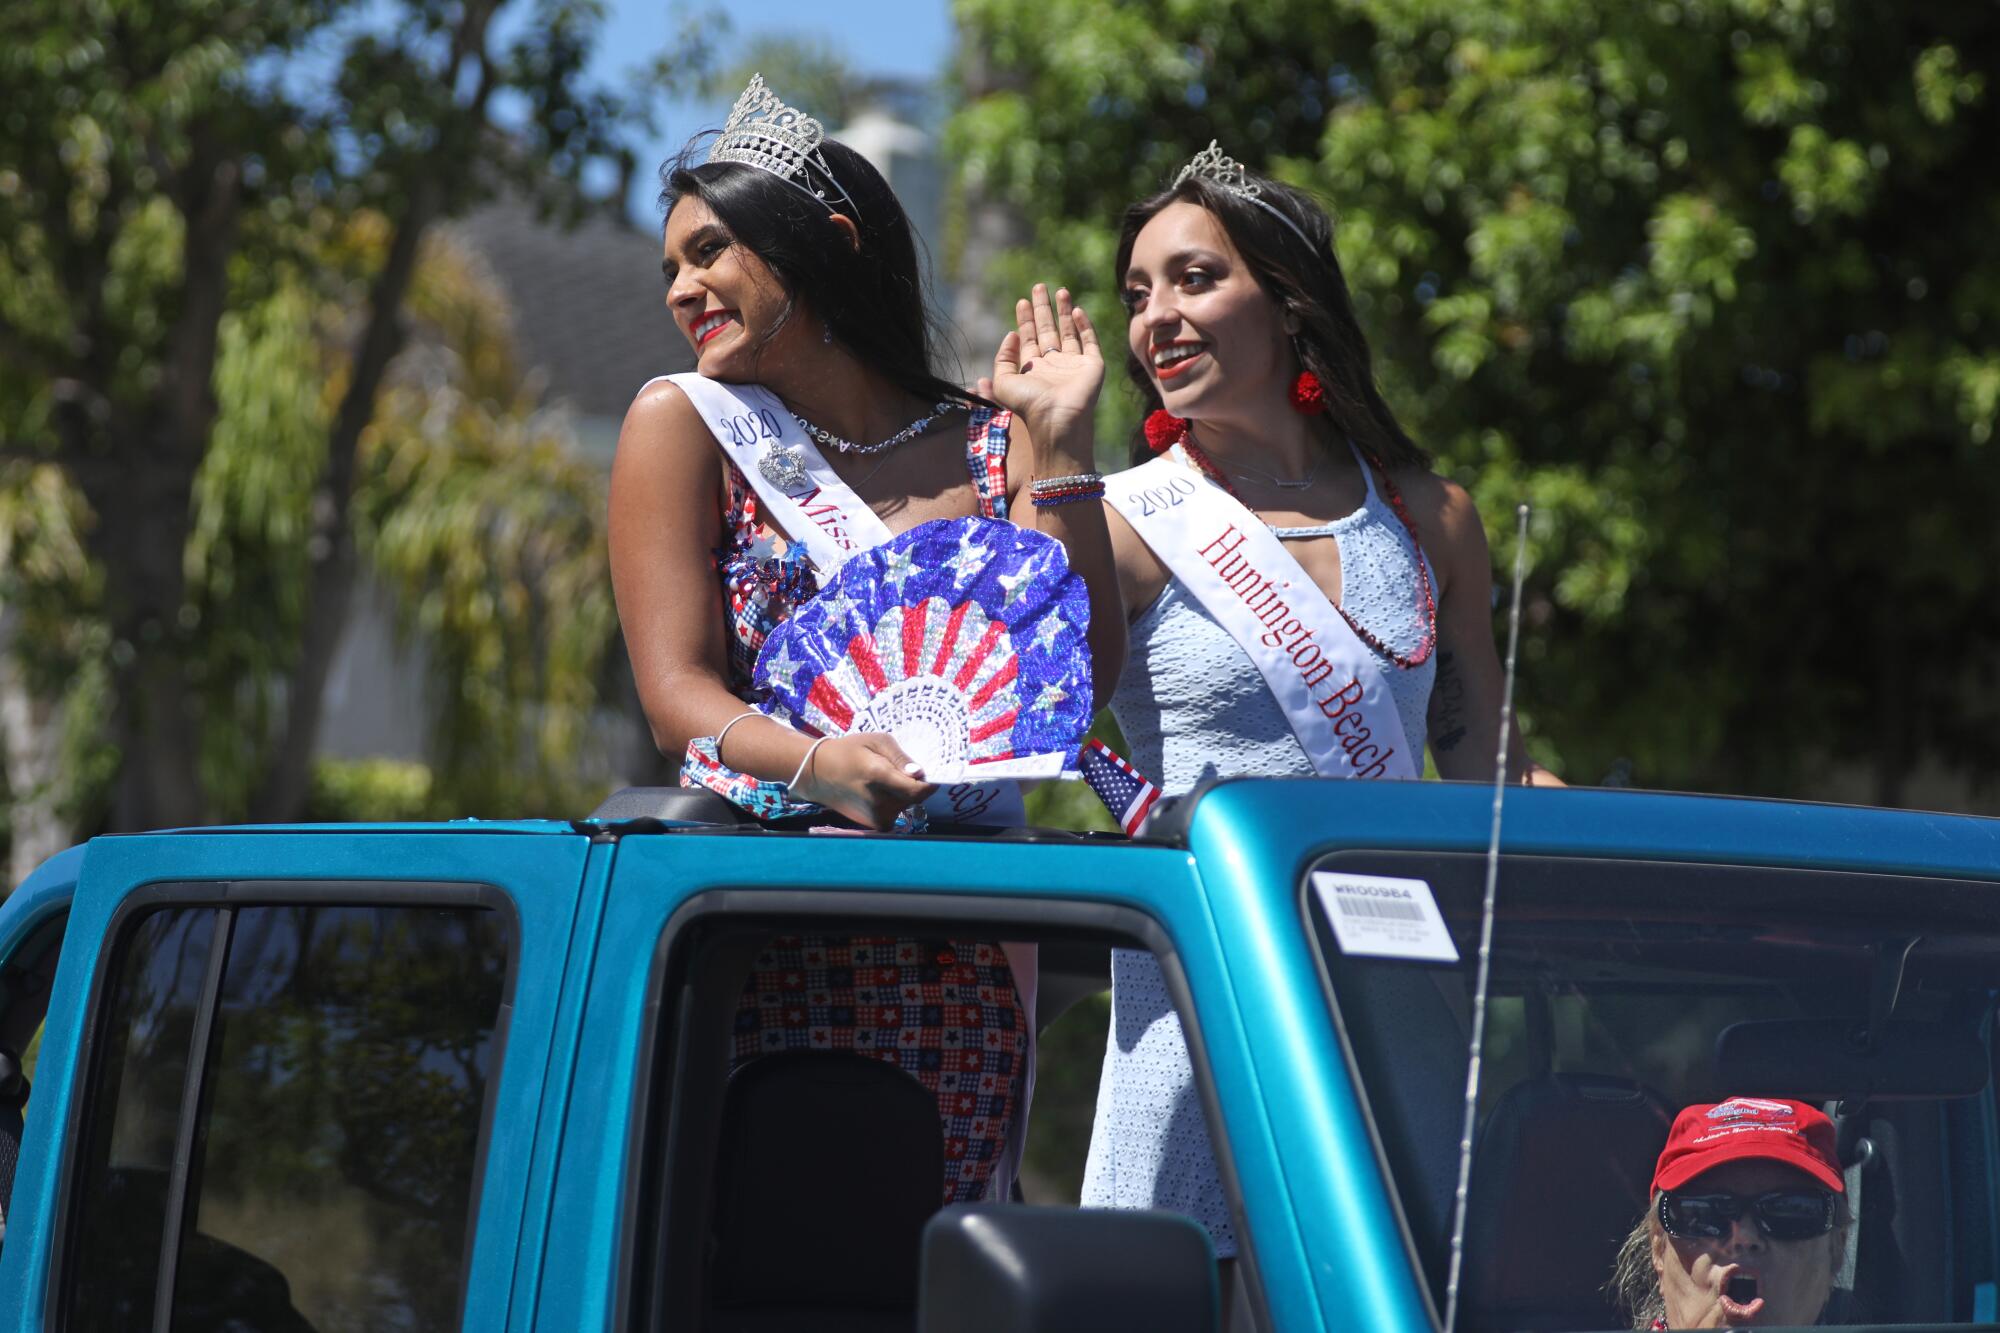 Miss Huntington Beach and Court is represented in the OneHB Neighborhood Parade in Huntington Beach celebrating July 4